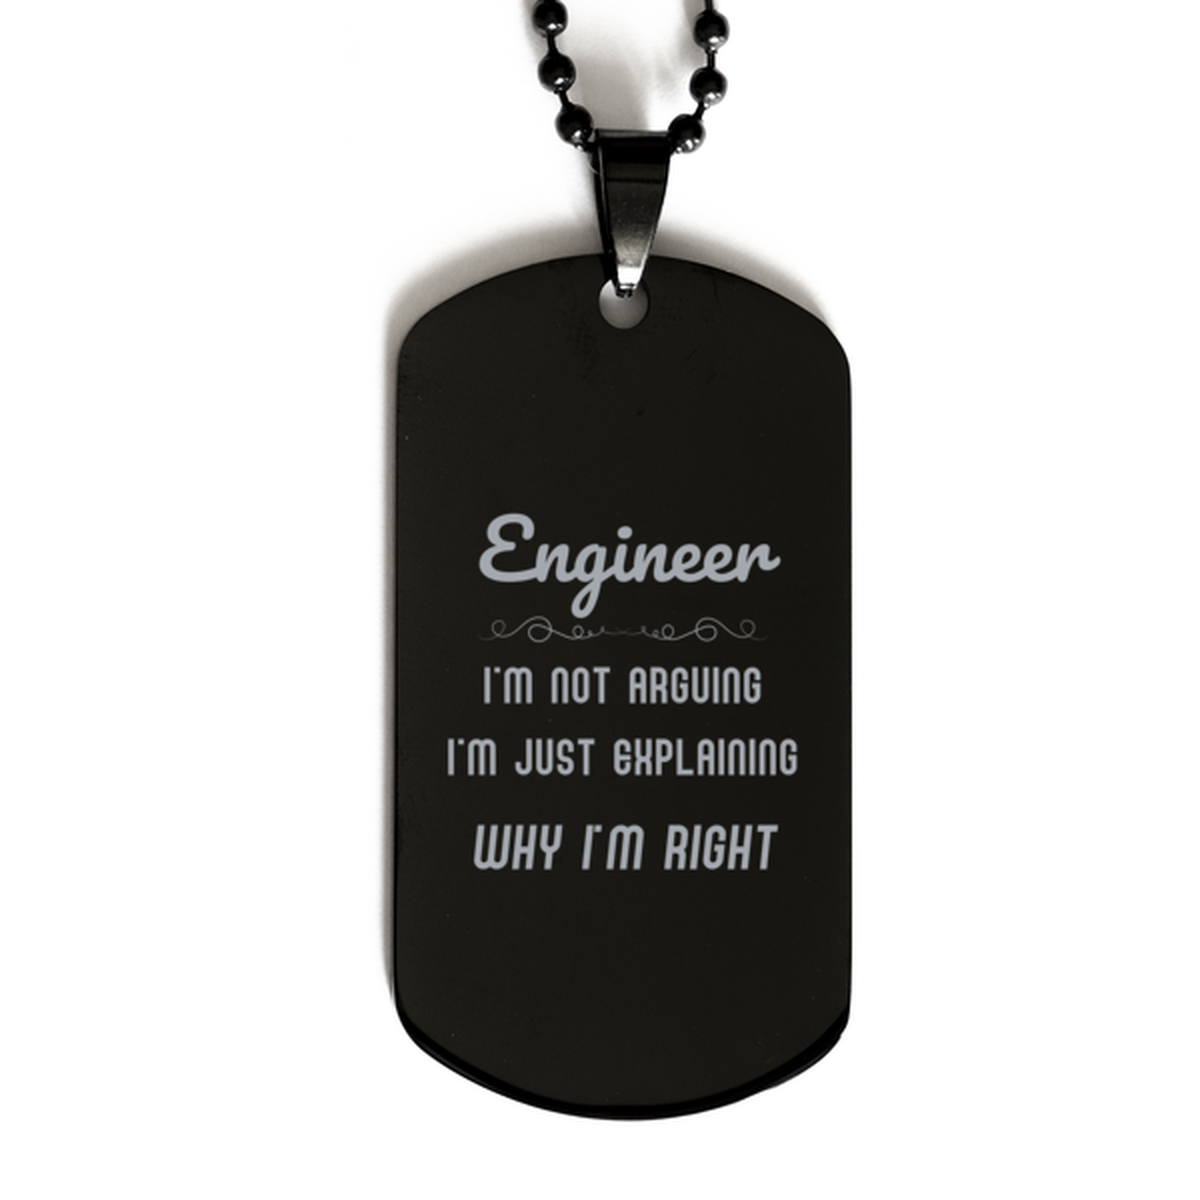 Engineer I'm not Arguing. I'm Just Explaining Why I'm RIGHT Black Dog Tag, Funny Saying Quote Engineer Gifts For Engineer Graduation Birthday Christmas Gifts for Men Women Coworker